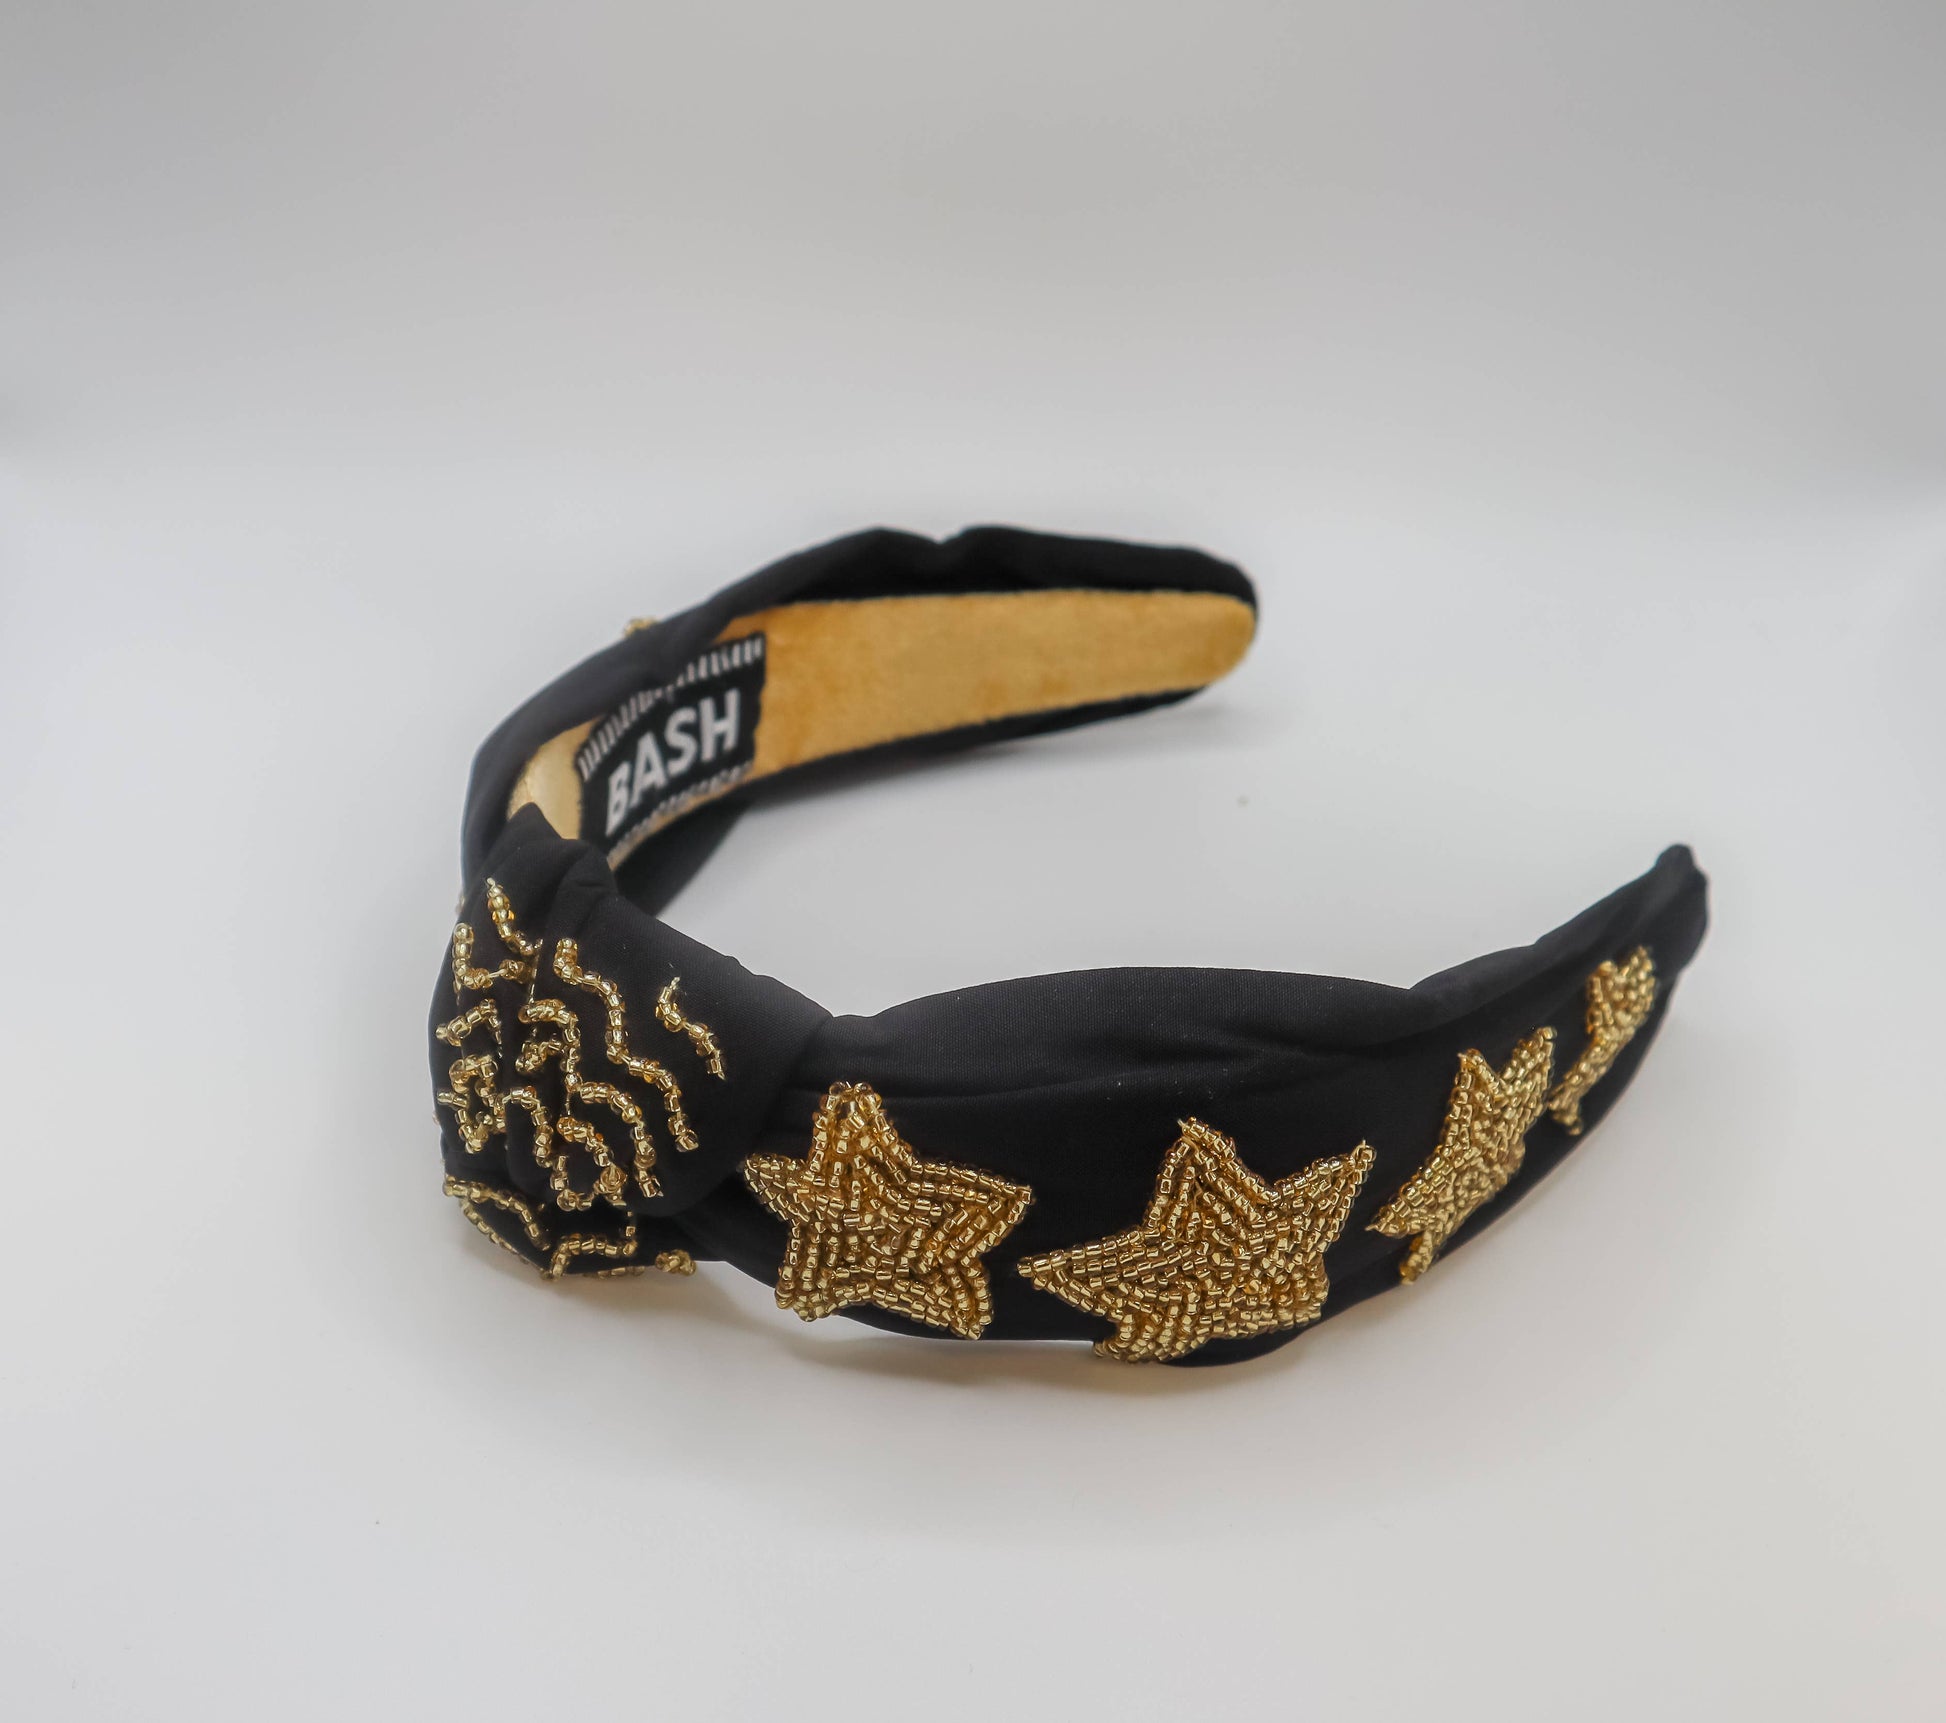 An eye-catching game day accessory, the Bash New Orleans Football Headband with Black and Gold Stars combines striking black and gold stars for a bold look.